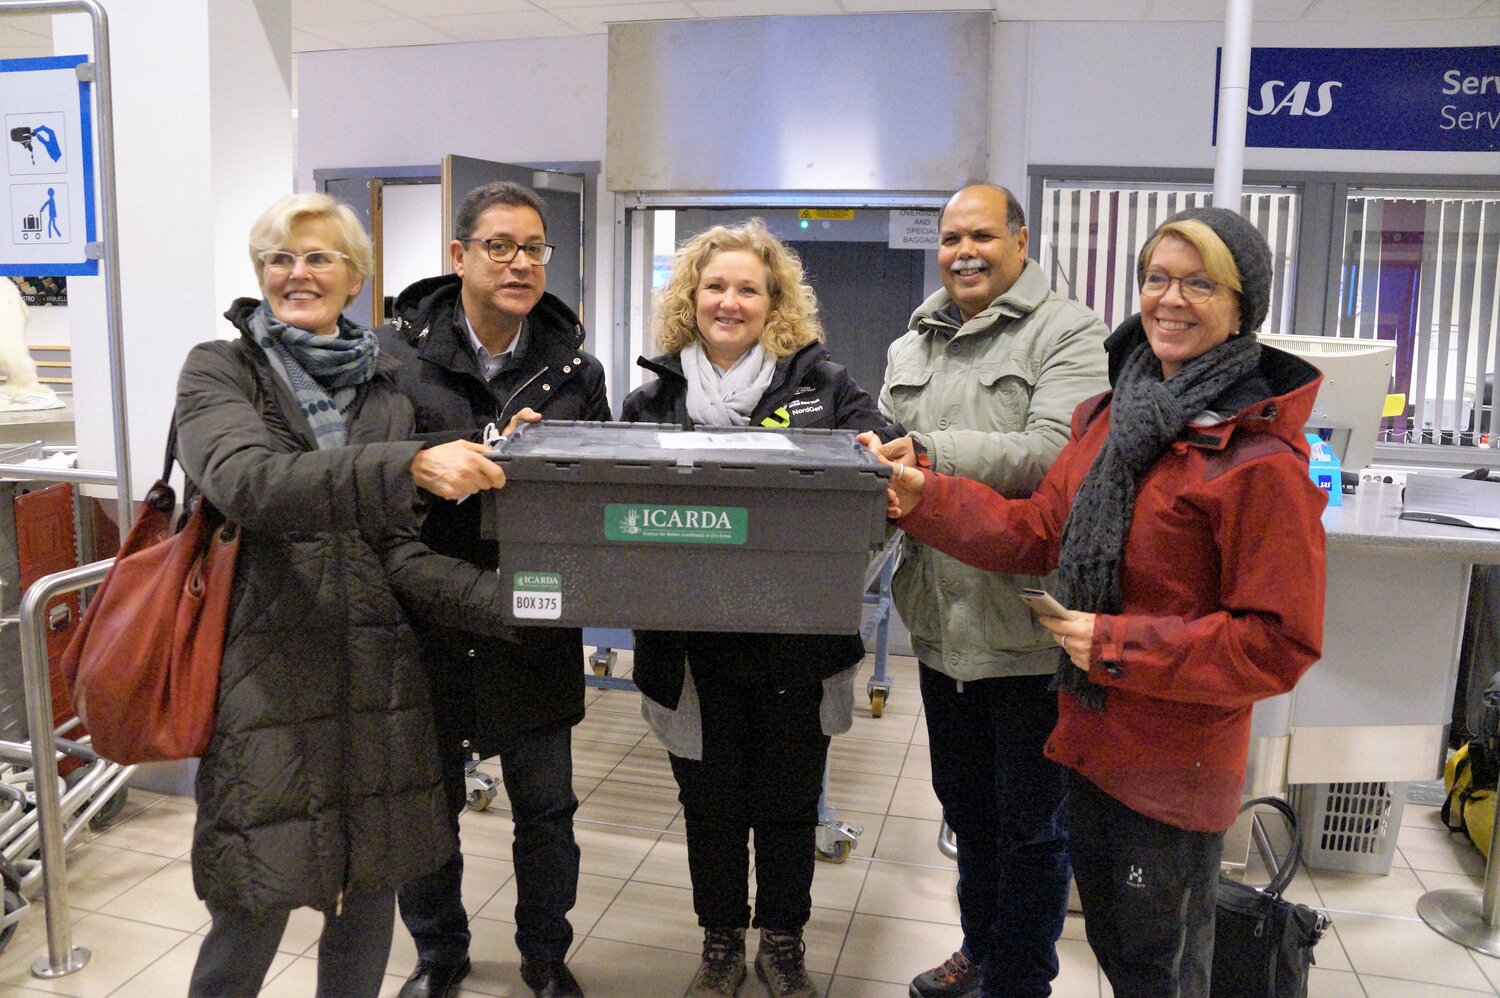 (Right to Left) Marie Haga, Crop Trust Executive Director with Dr. Ahmed Amri, ICARDA's Head of Genetic Resources; Lise Lykke Steffenson, Director of NordGen; Aly Abousabaa, ICARDA Director General and Margret Thalwitz, ICARDA Board Chair with ICARDA's seeds at the Longyearbyen airport. Photo: Andrea Gros, ICARDA